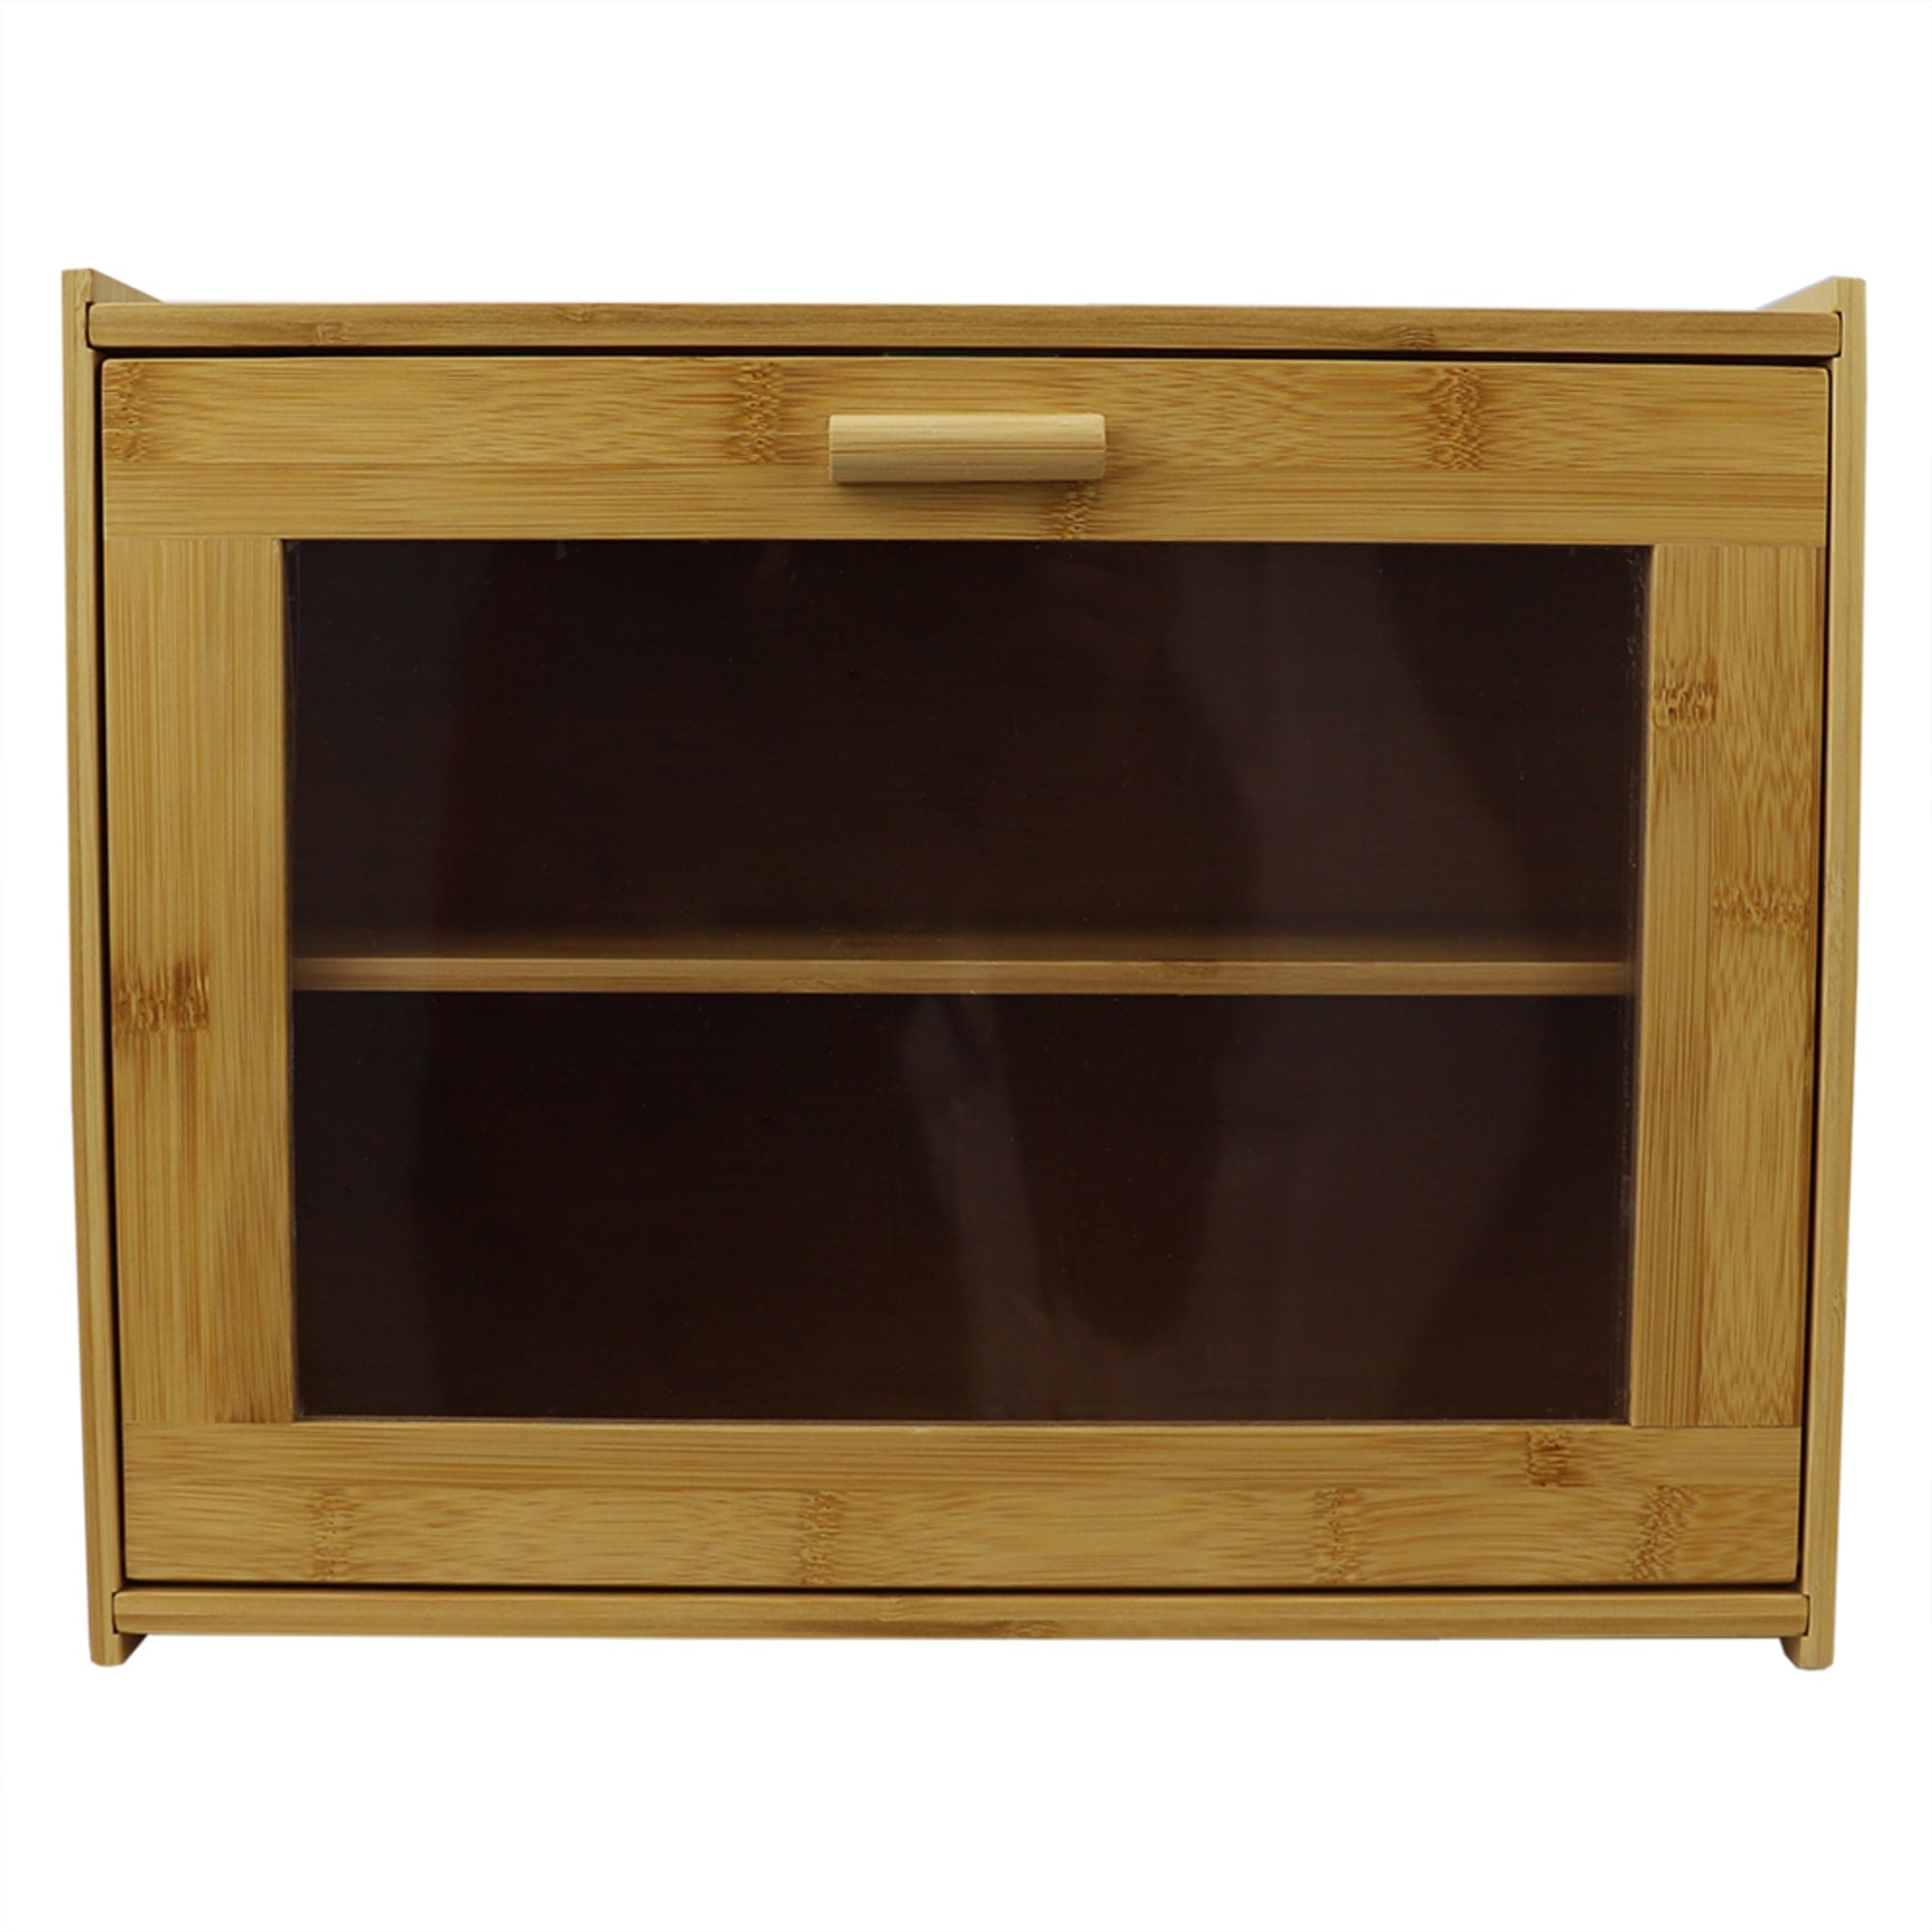 Home Basics 2 Tier Bamboo Bread Box with Peek-Through Acetate Window, Natural $35.00 EACH, CASE PACK OF 4